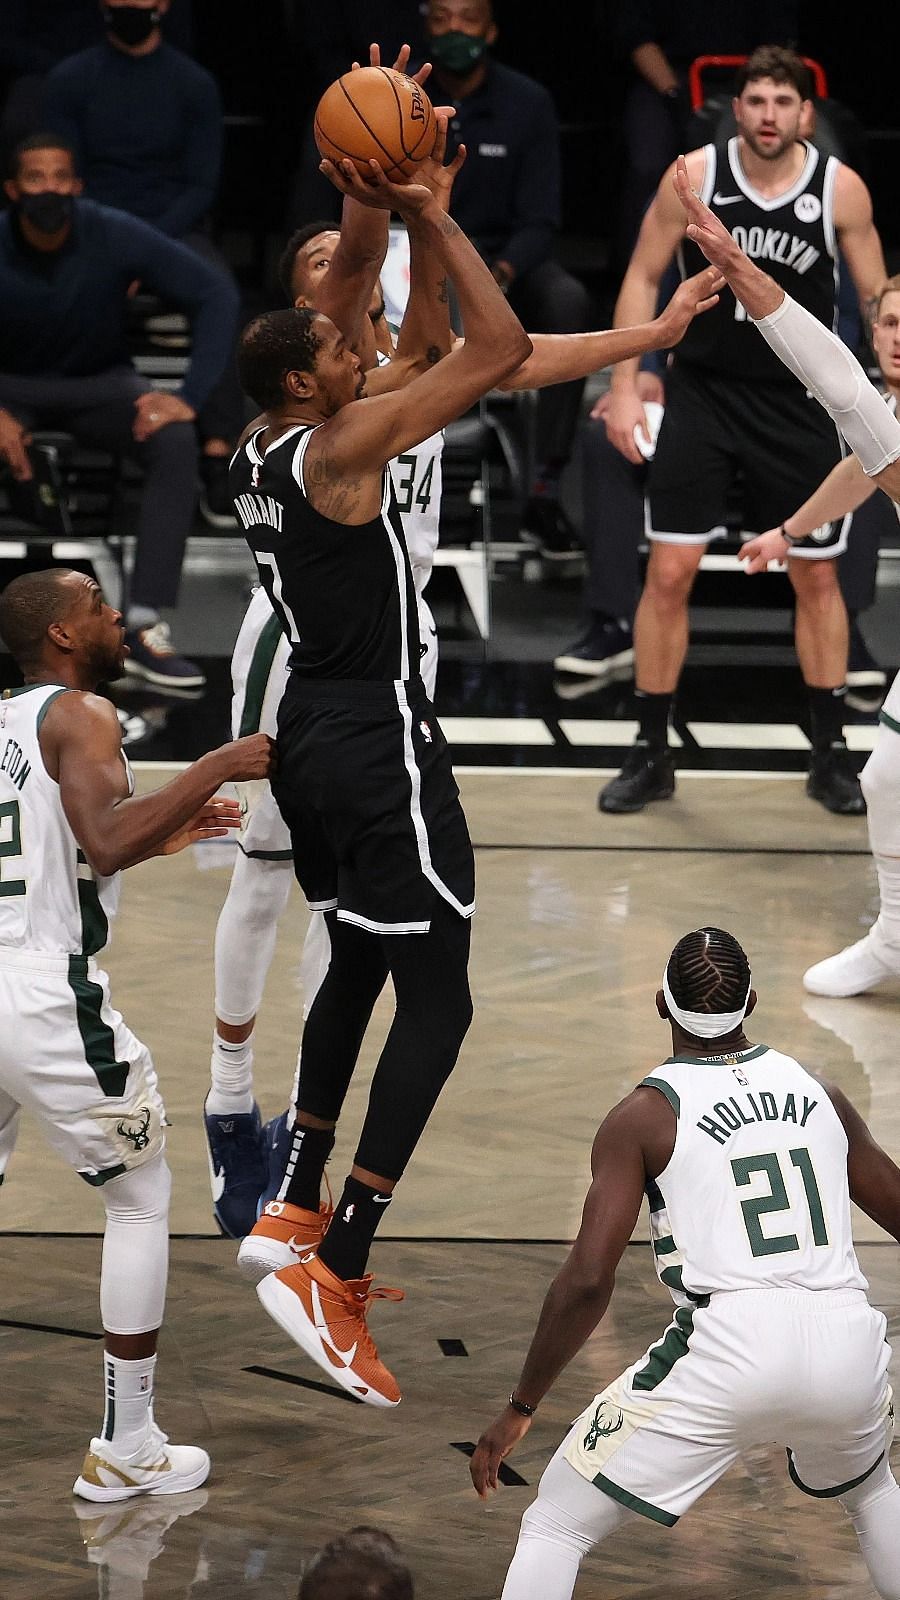 Milwaukee Bucks Vs Brooklyn Nets Prediction And Match Preview June 5th 2021 Game 1 2021 Nba Playoffs